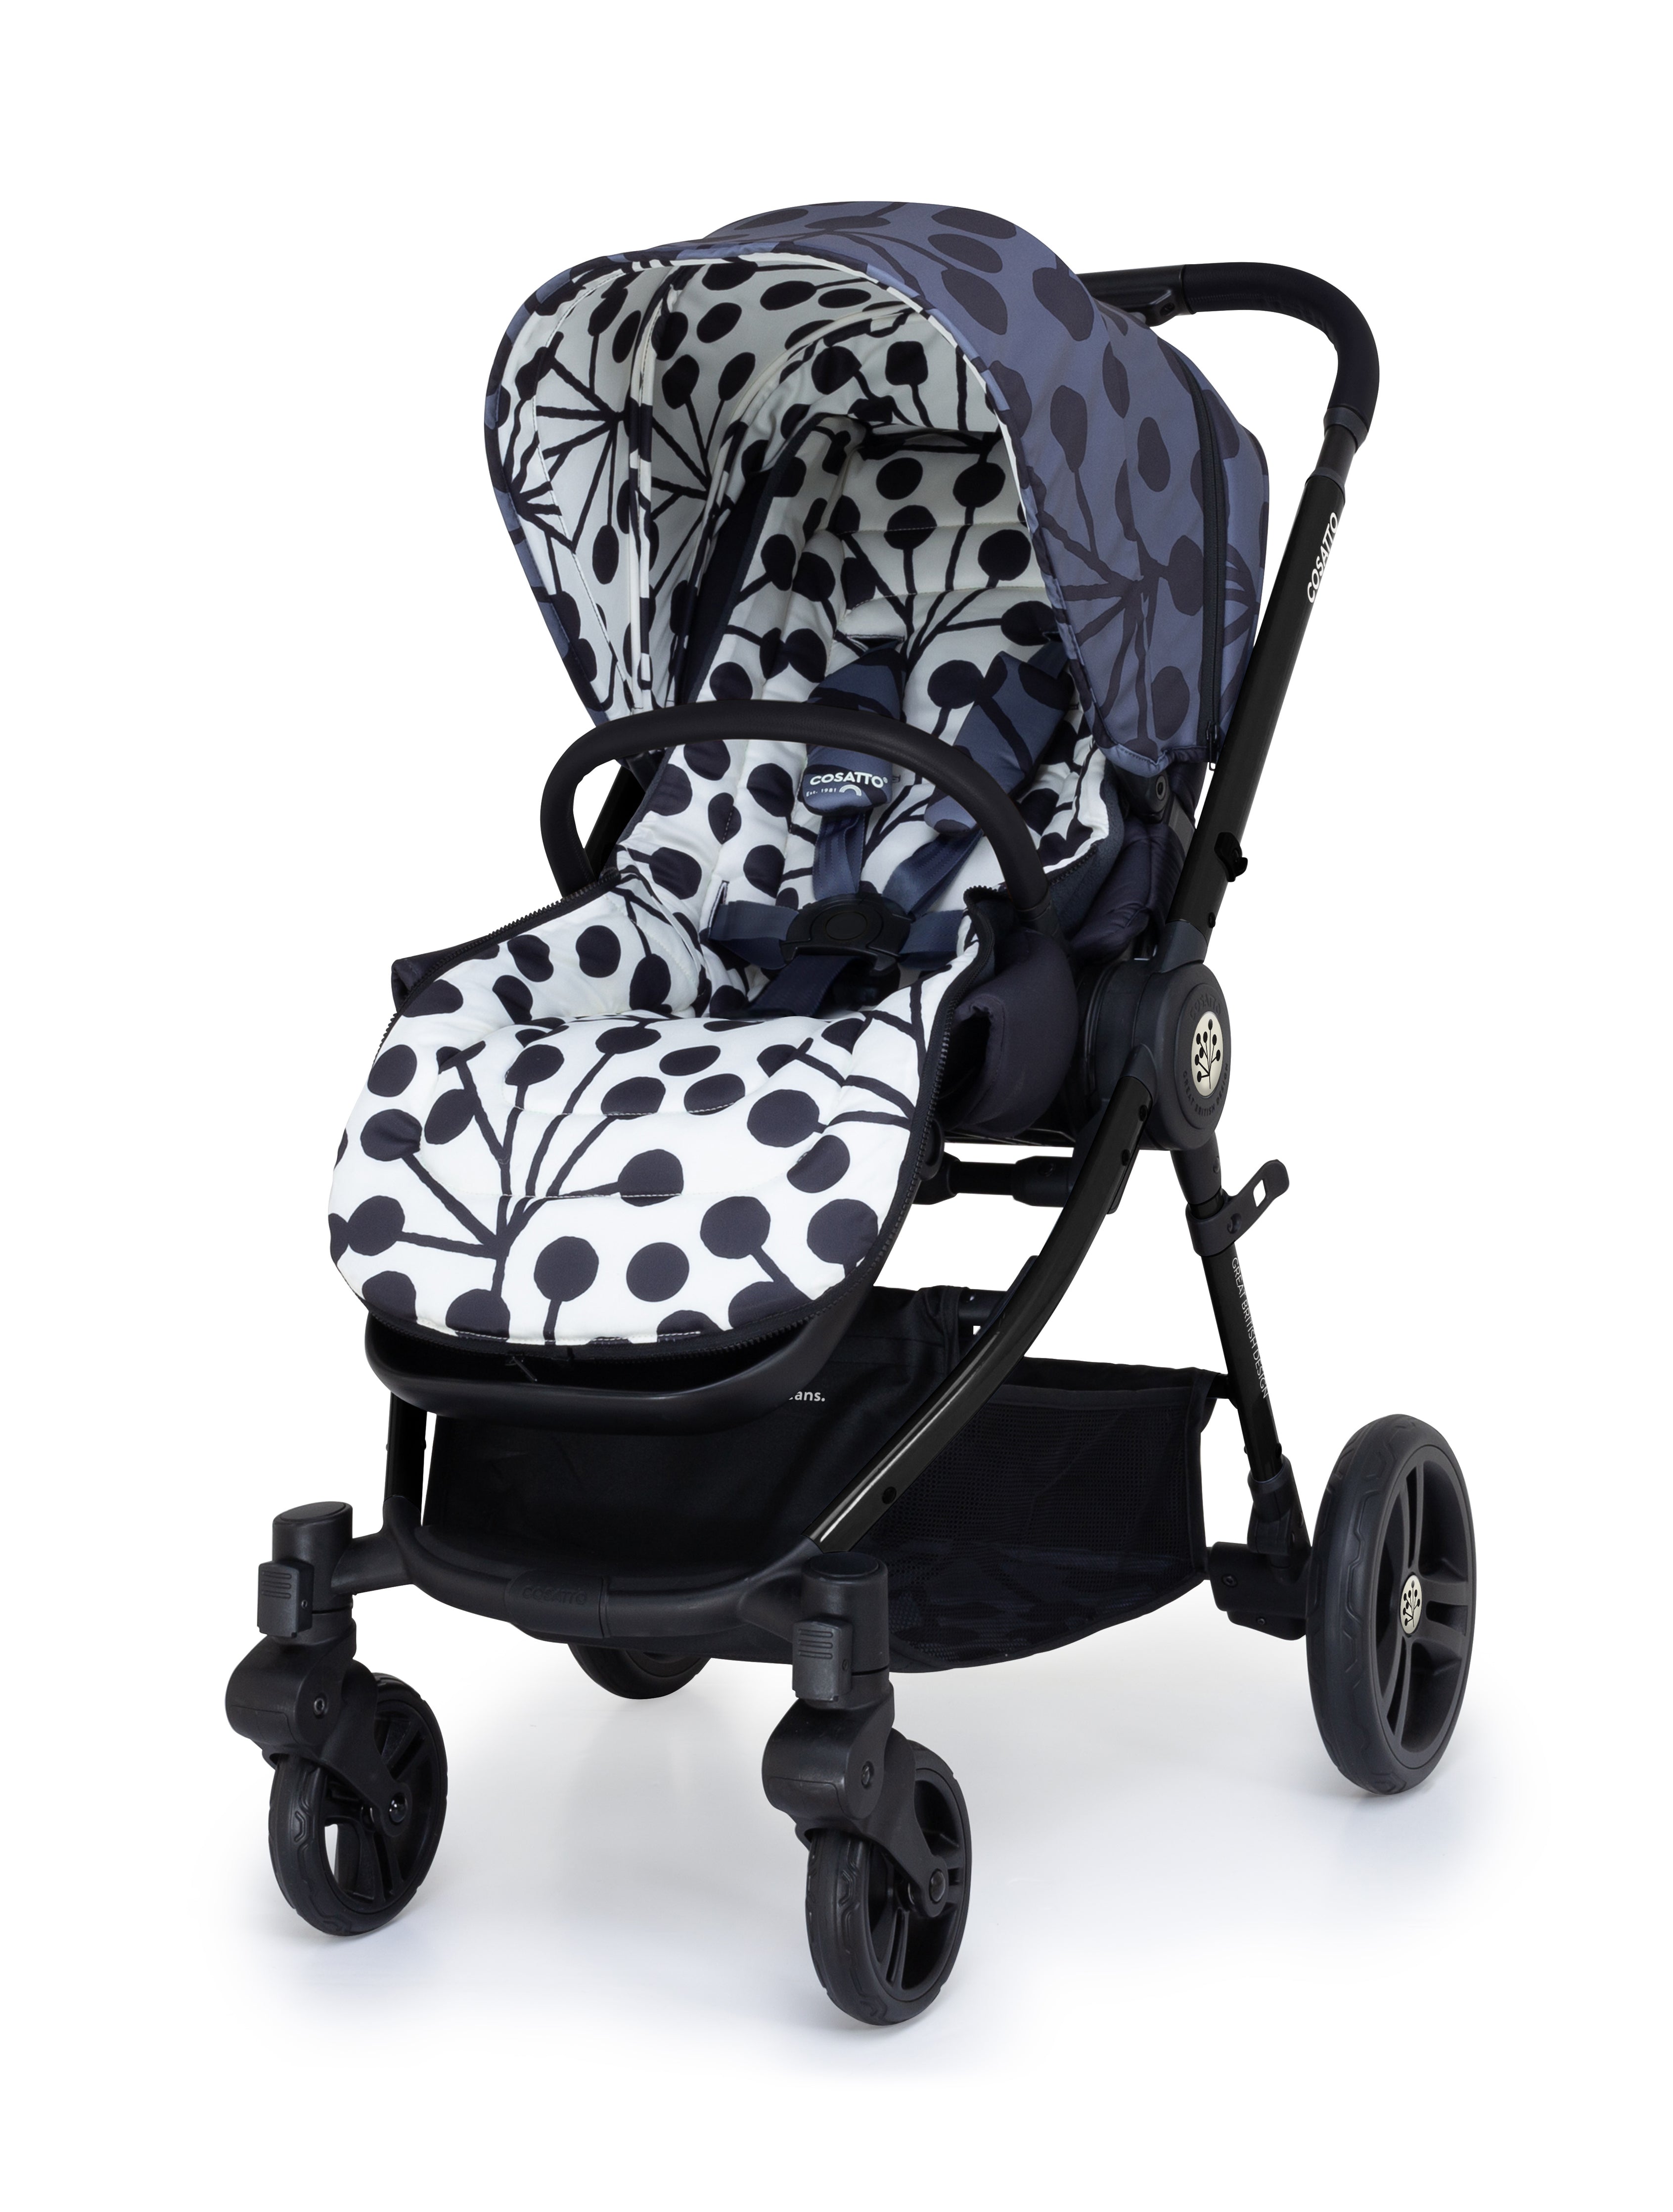 Wowee Pushchair and Accessory Bundle Lunaria